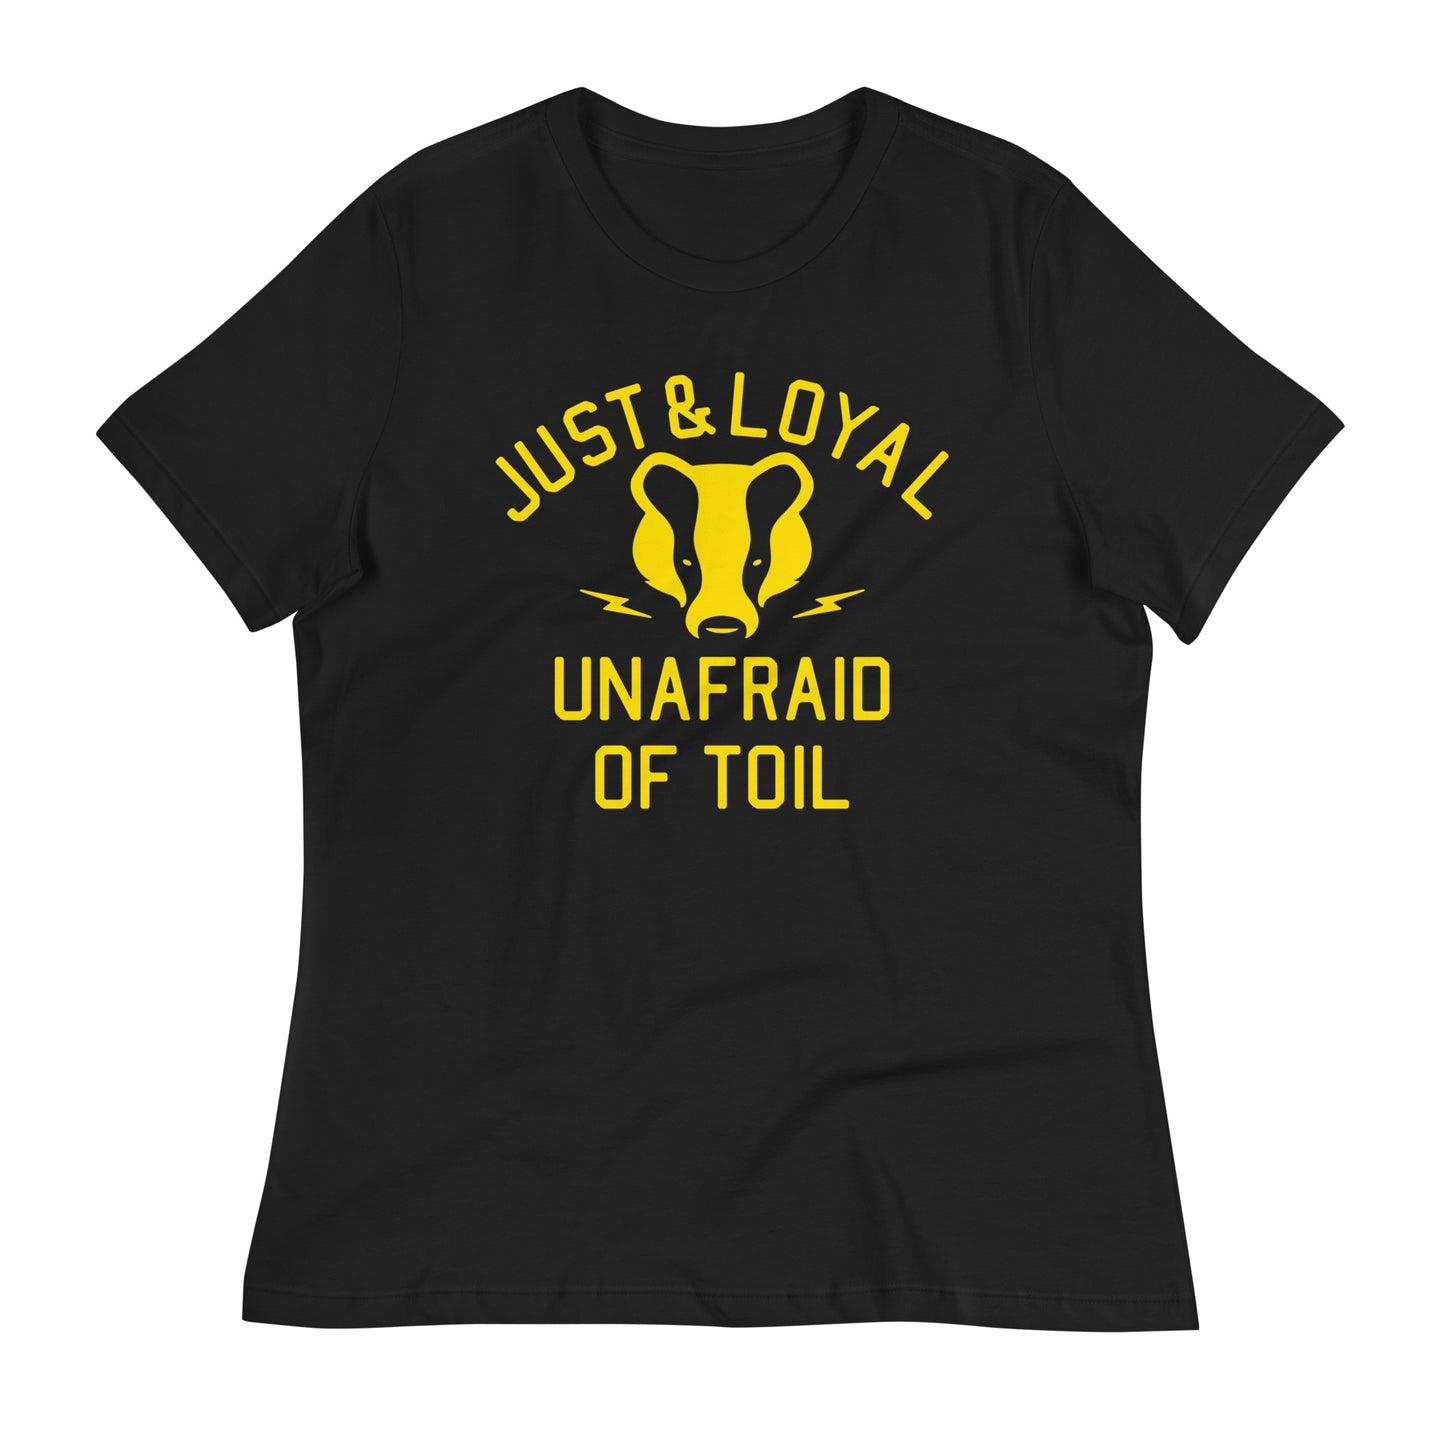 Just And Loyal, Unafraid Of Toil Women's Signature Tee